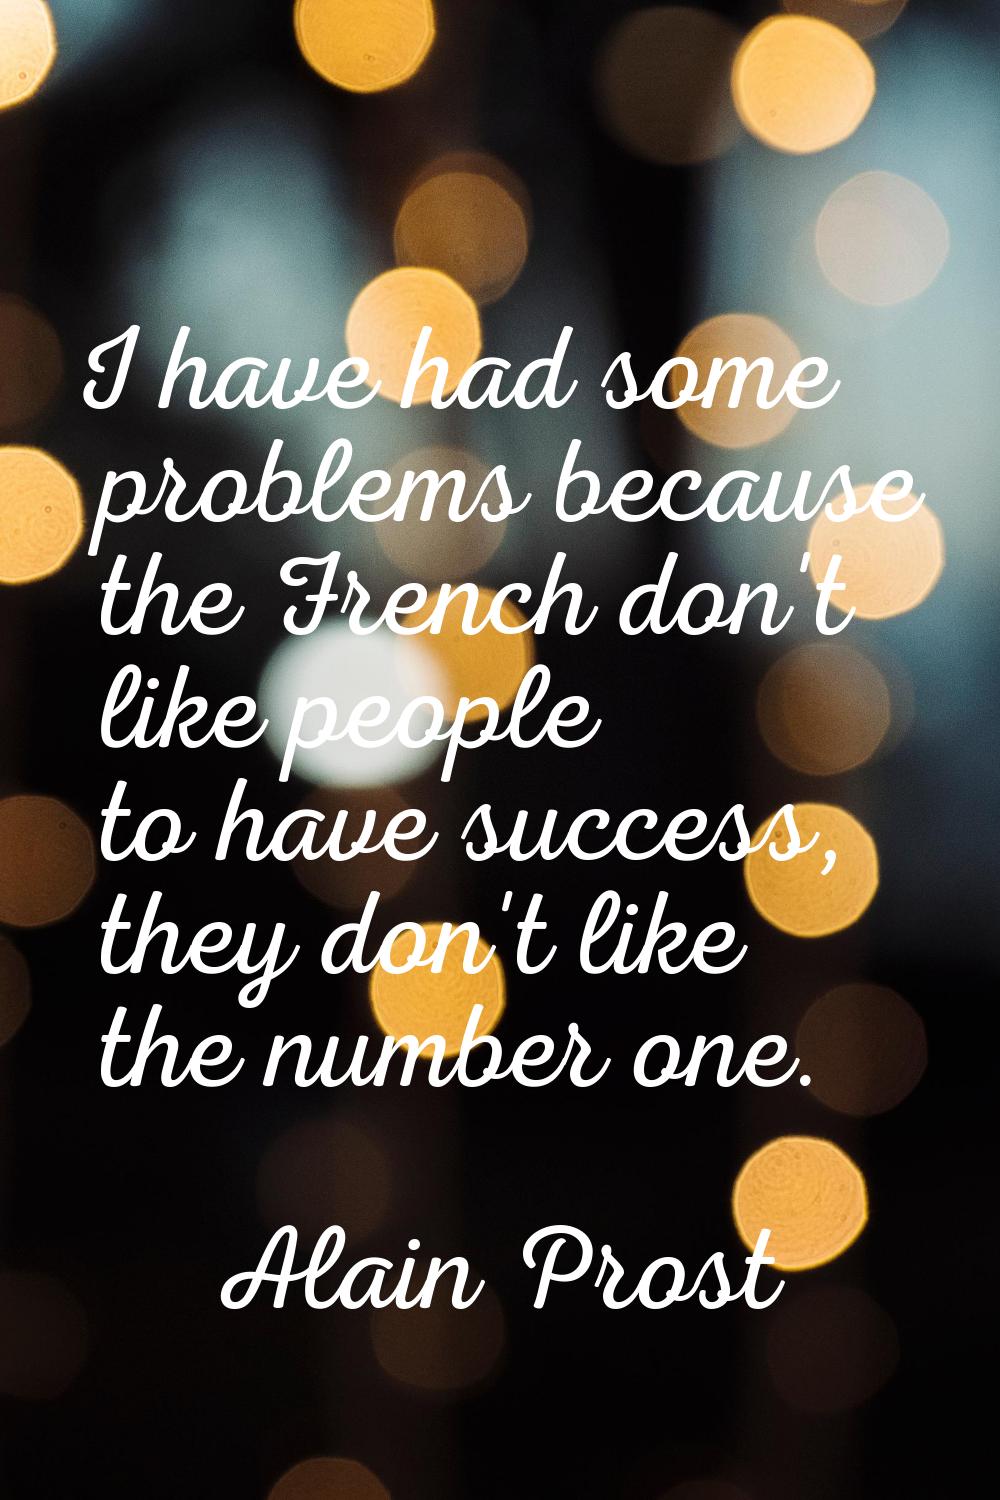 I have had some problems because the French don't like people to have success, they don't like the 